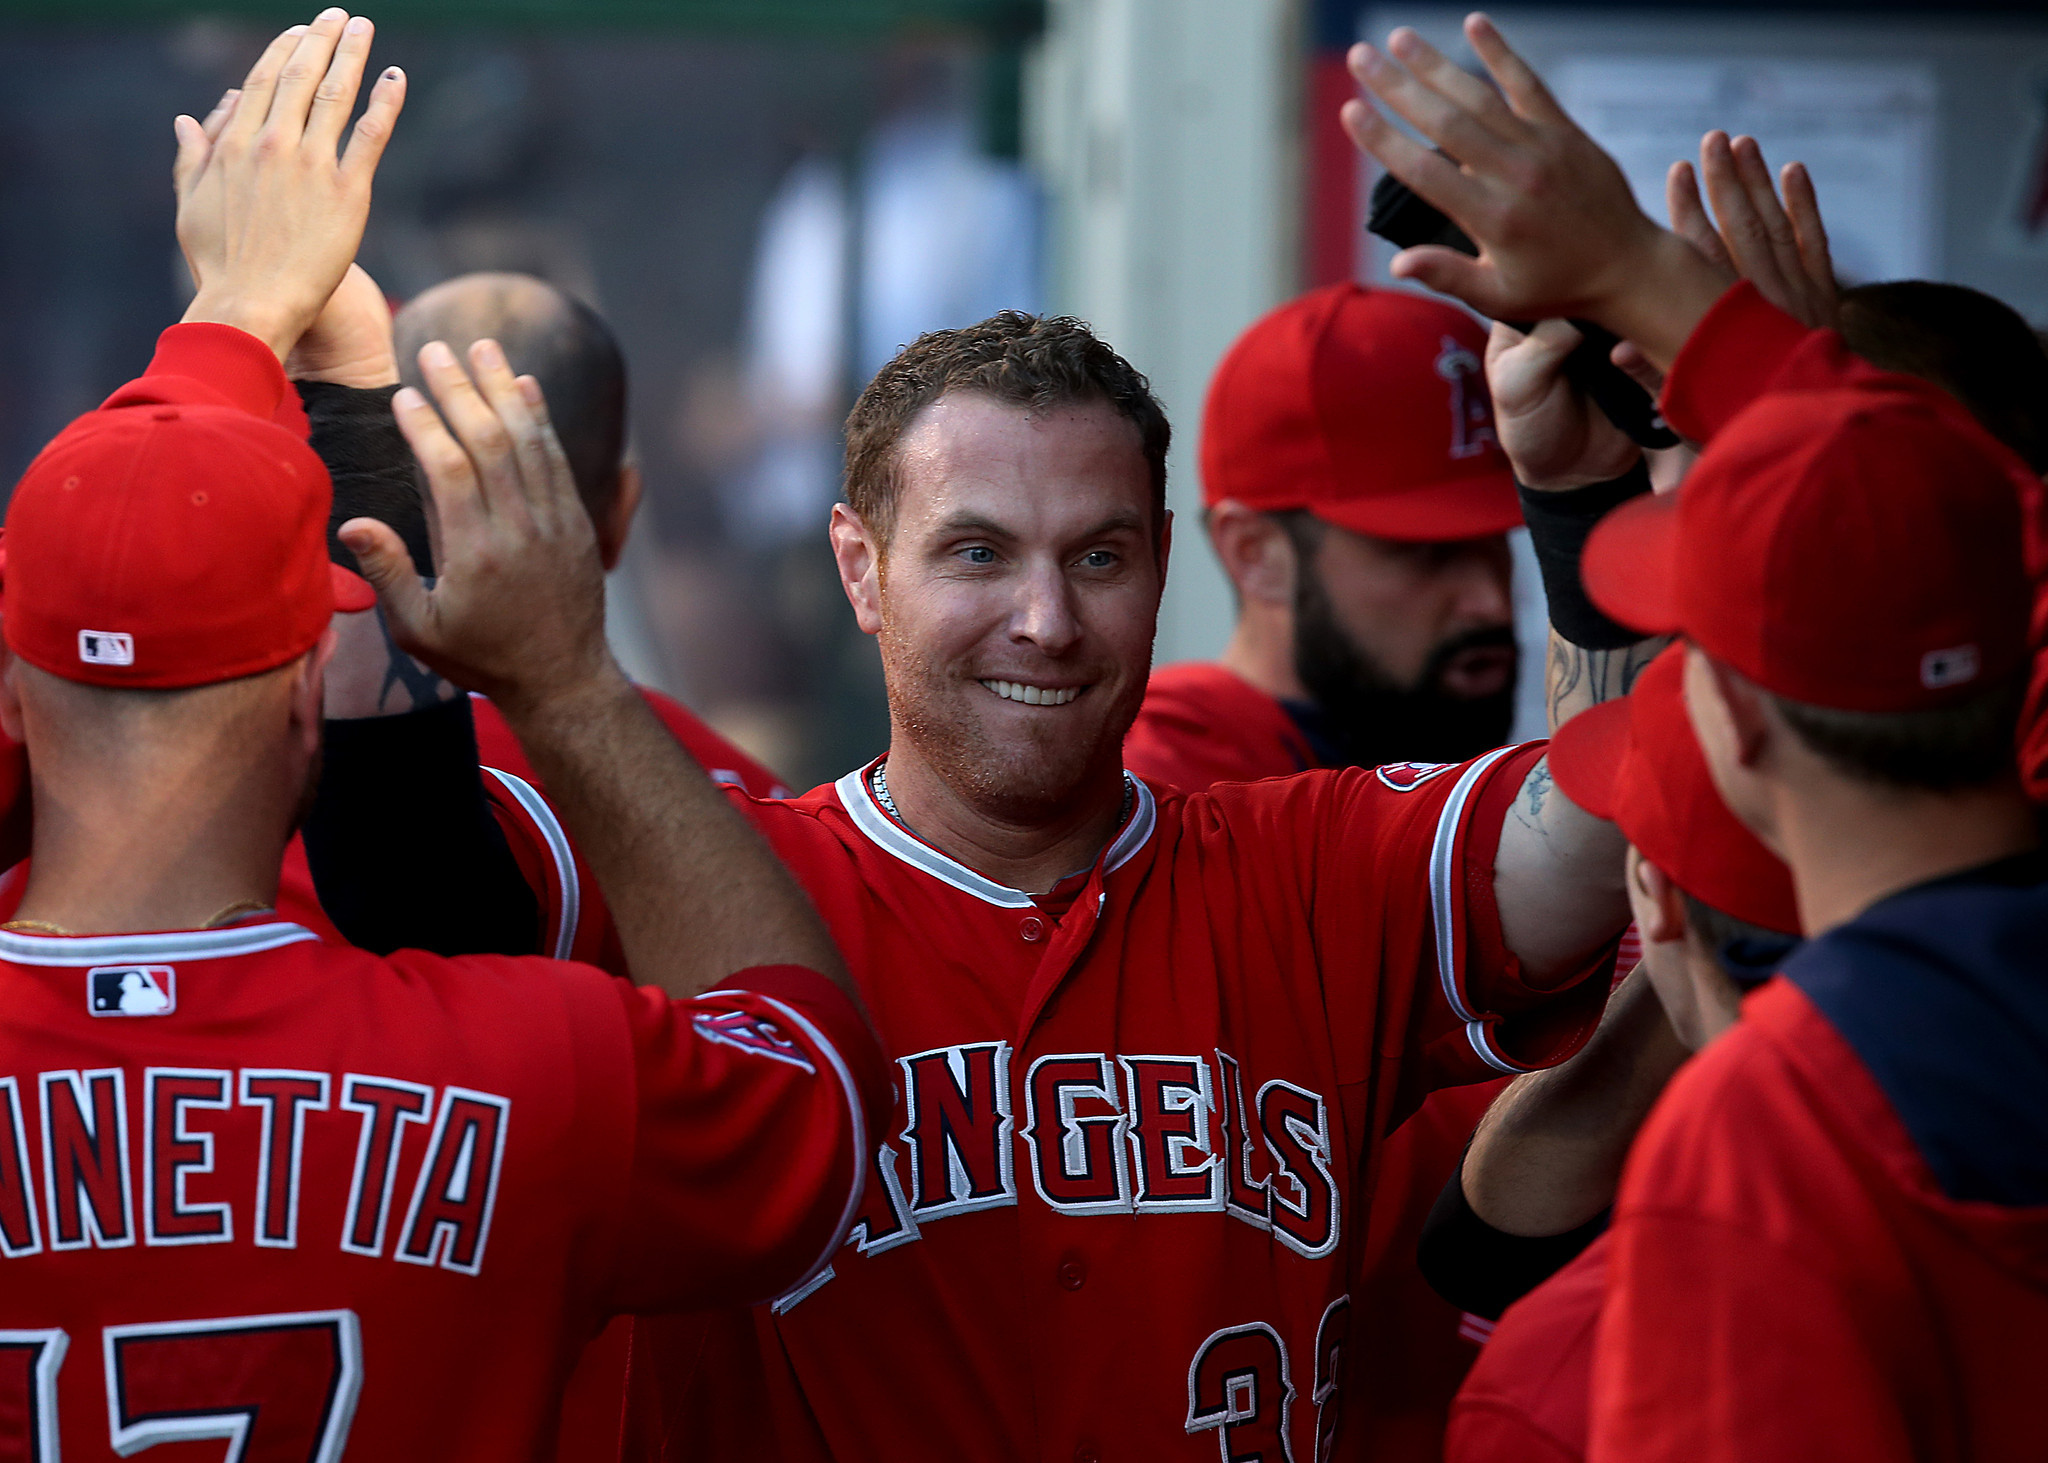 Angels want Josh Hamilton to be playing for someone